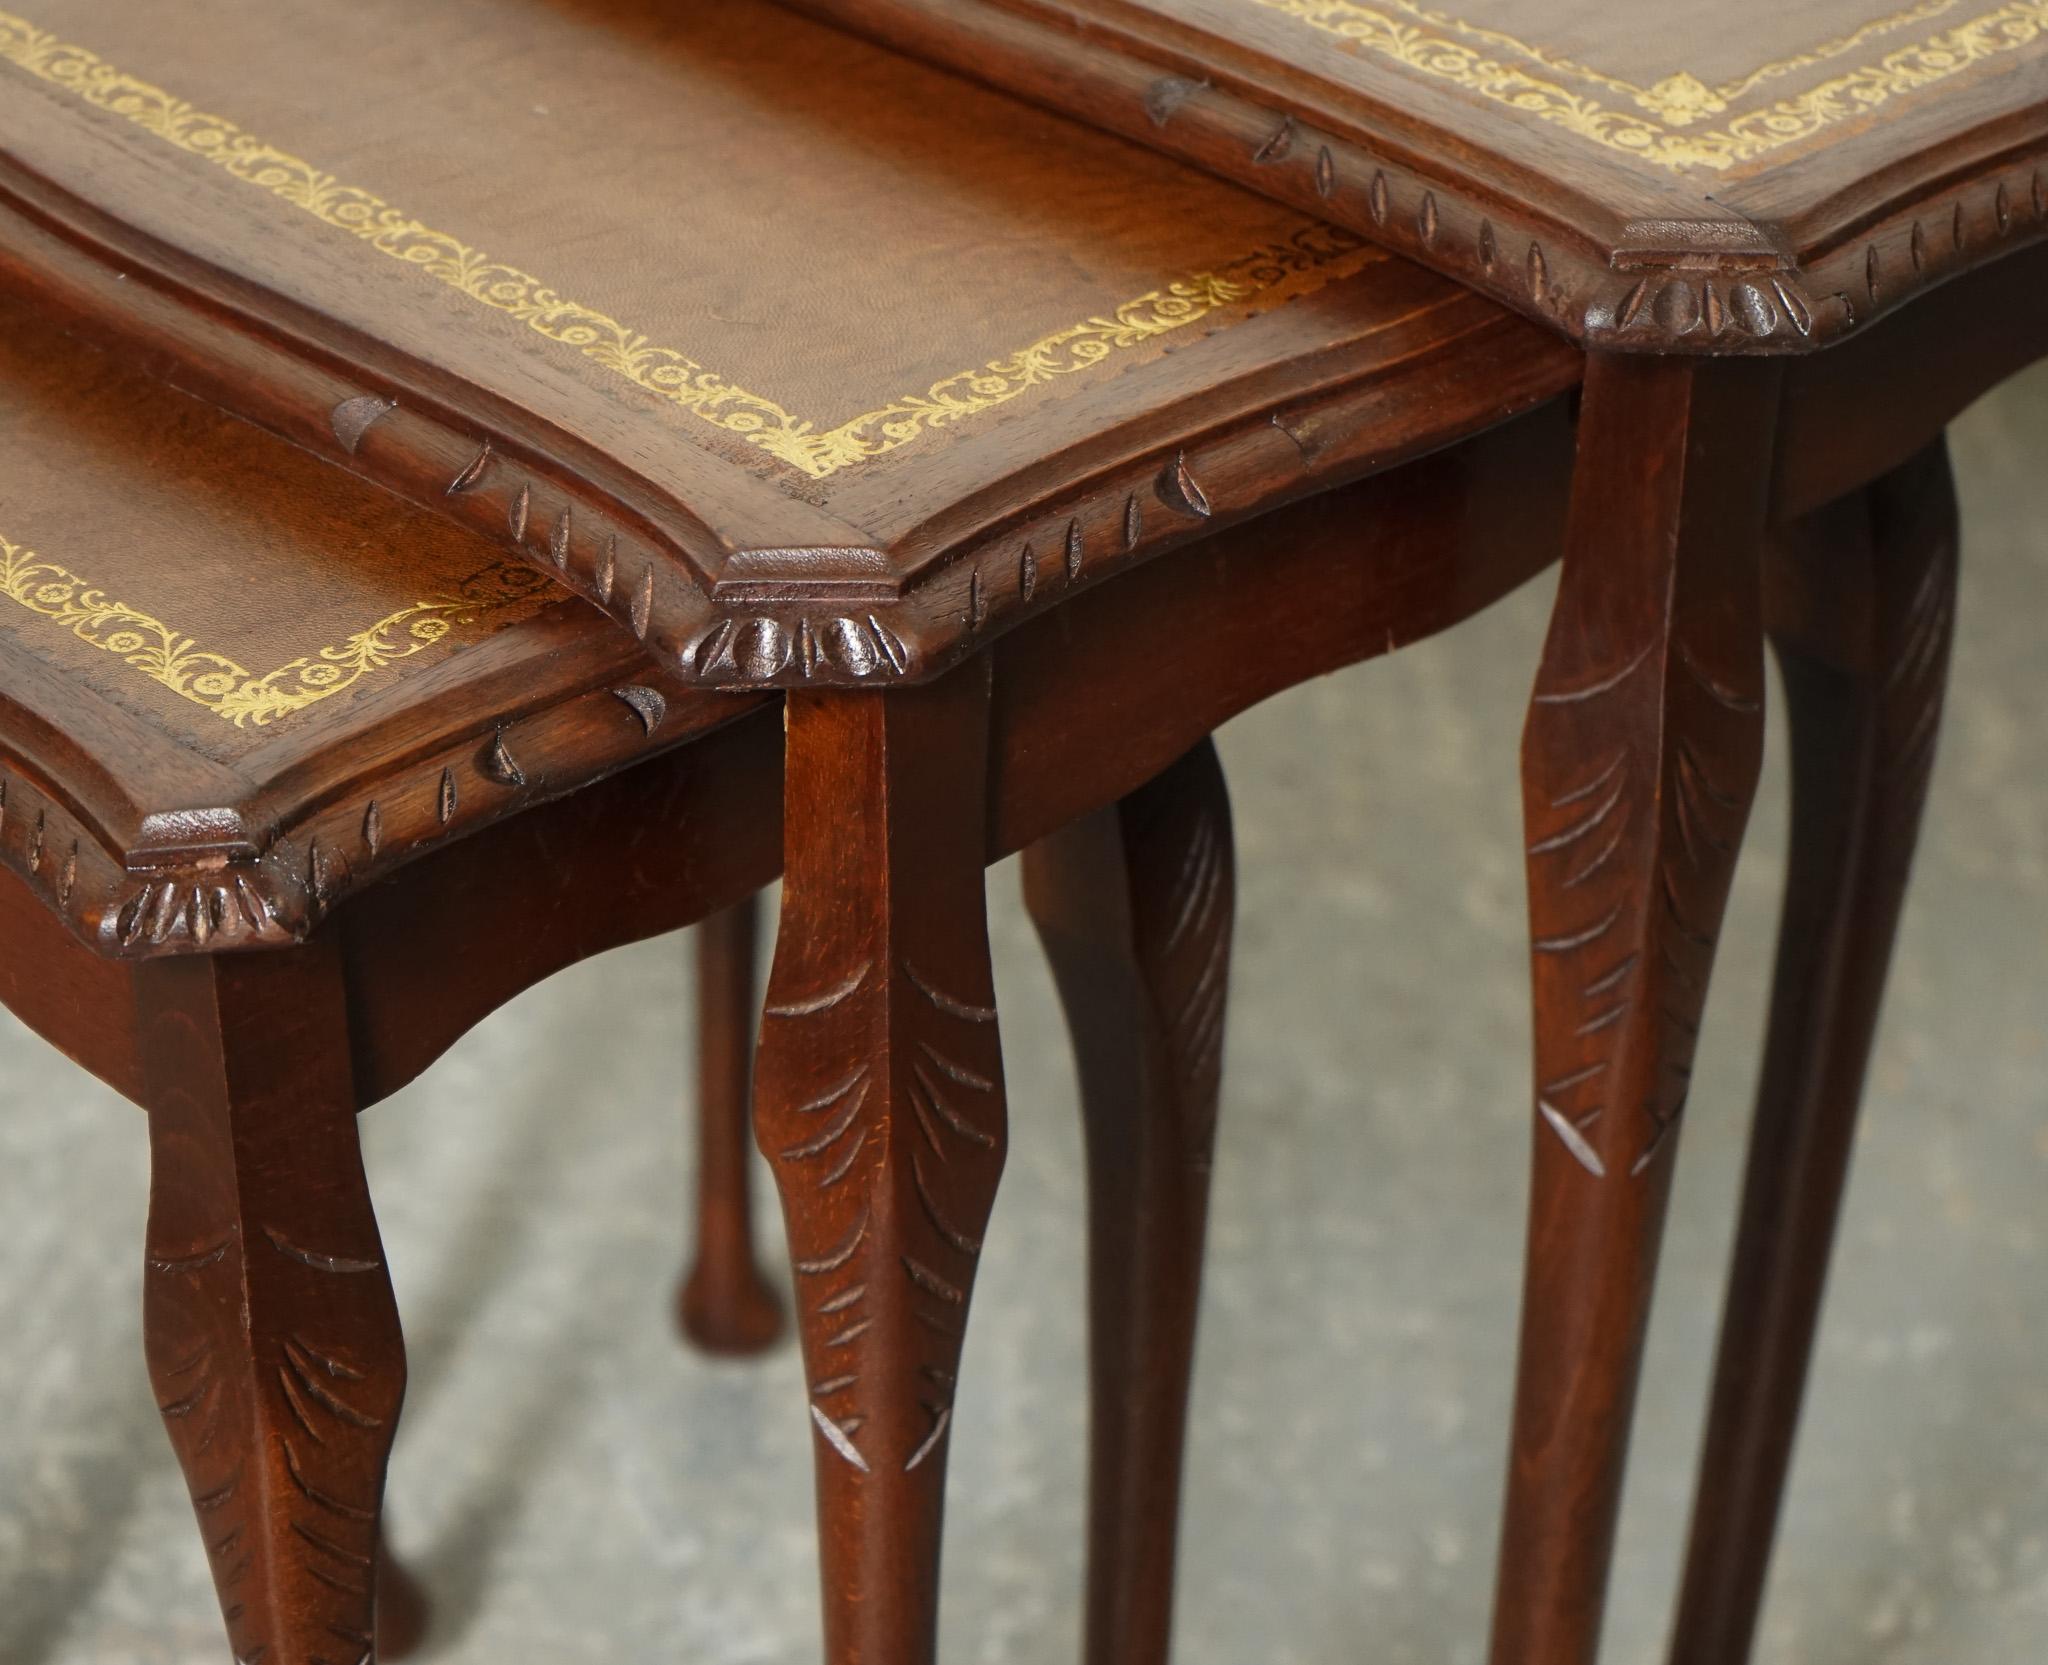 VINTAGE NEST OF TABLES QUEEN ANNE STYLE LEGS WiTH BROWN EMBOSSED LEATHER TOP For Sale 1